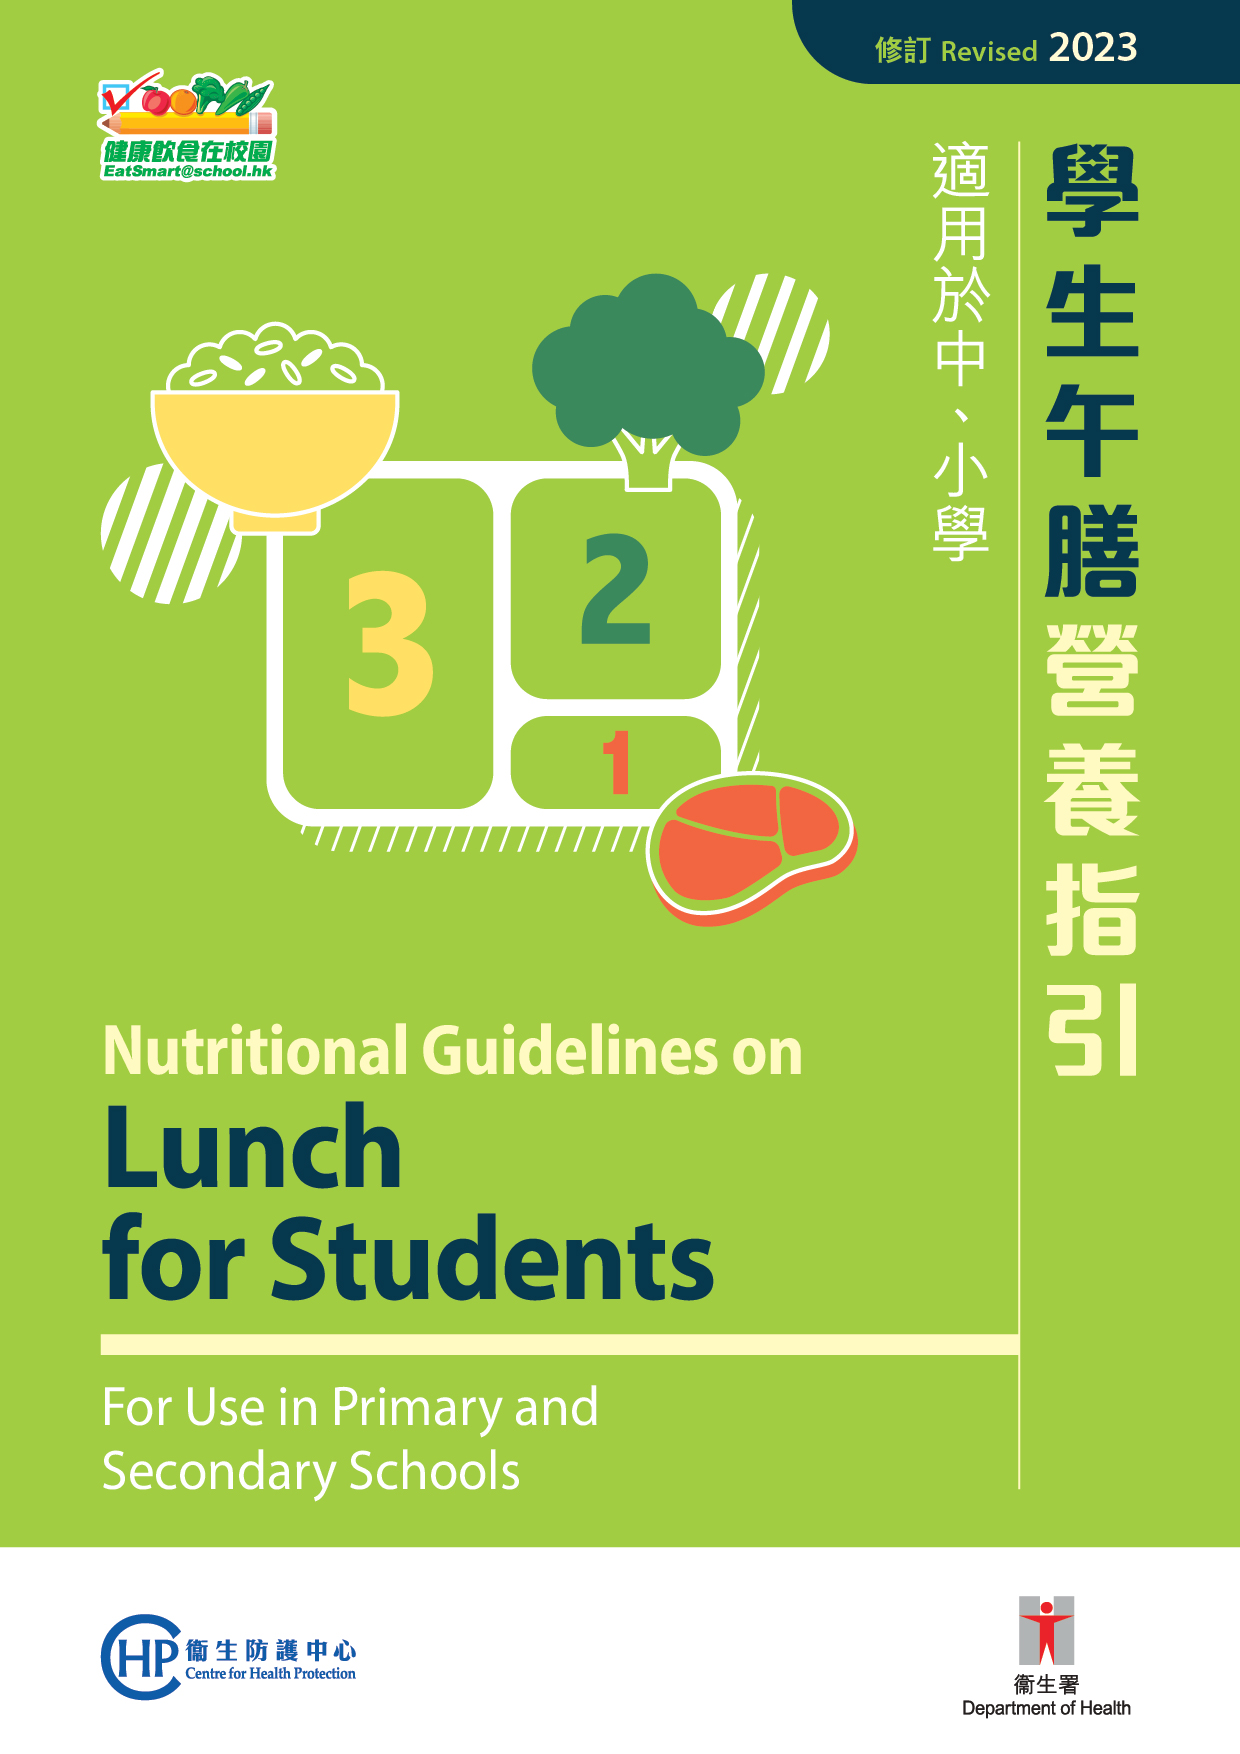 Nutritional Guidelines on Lunch for Students